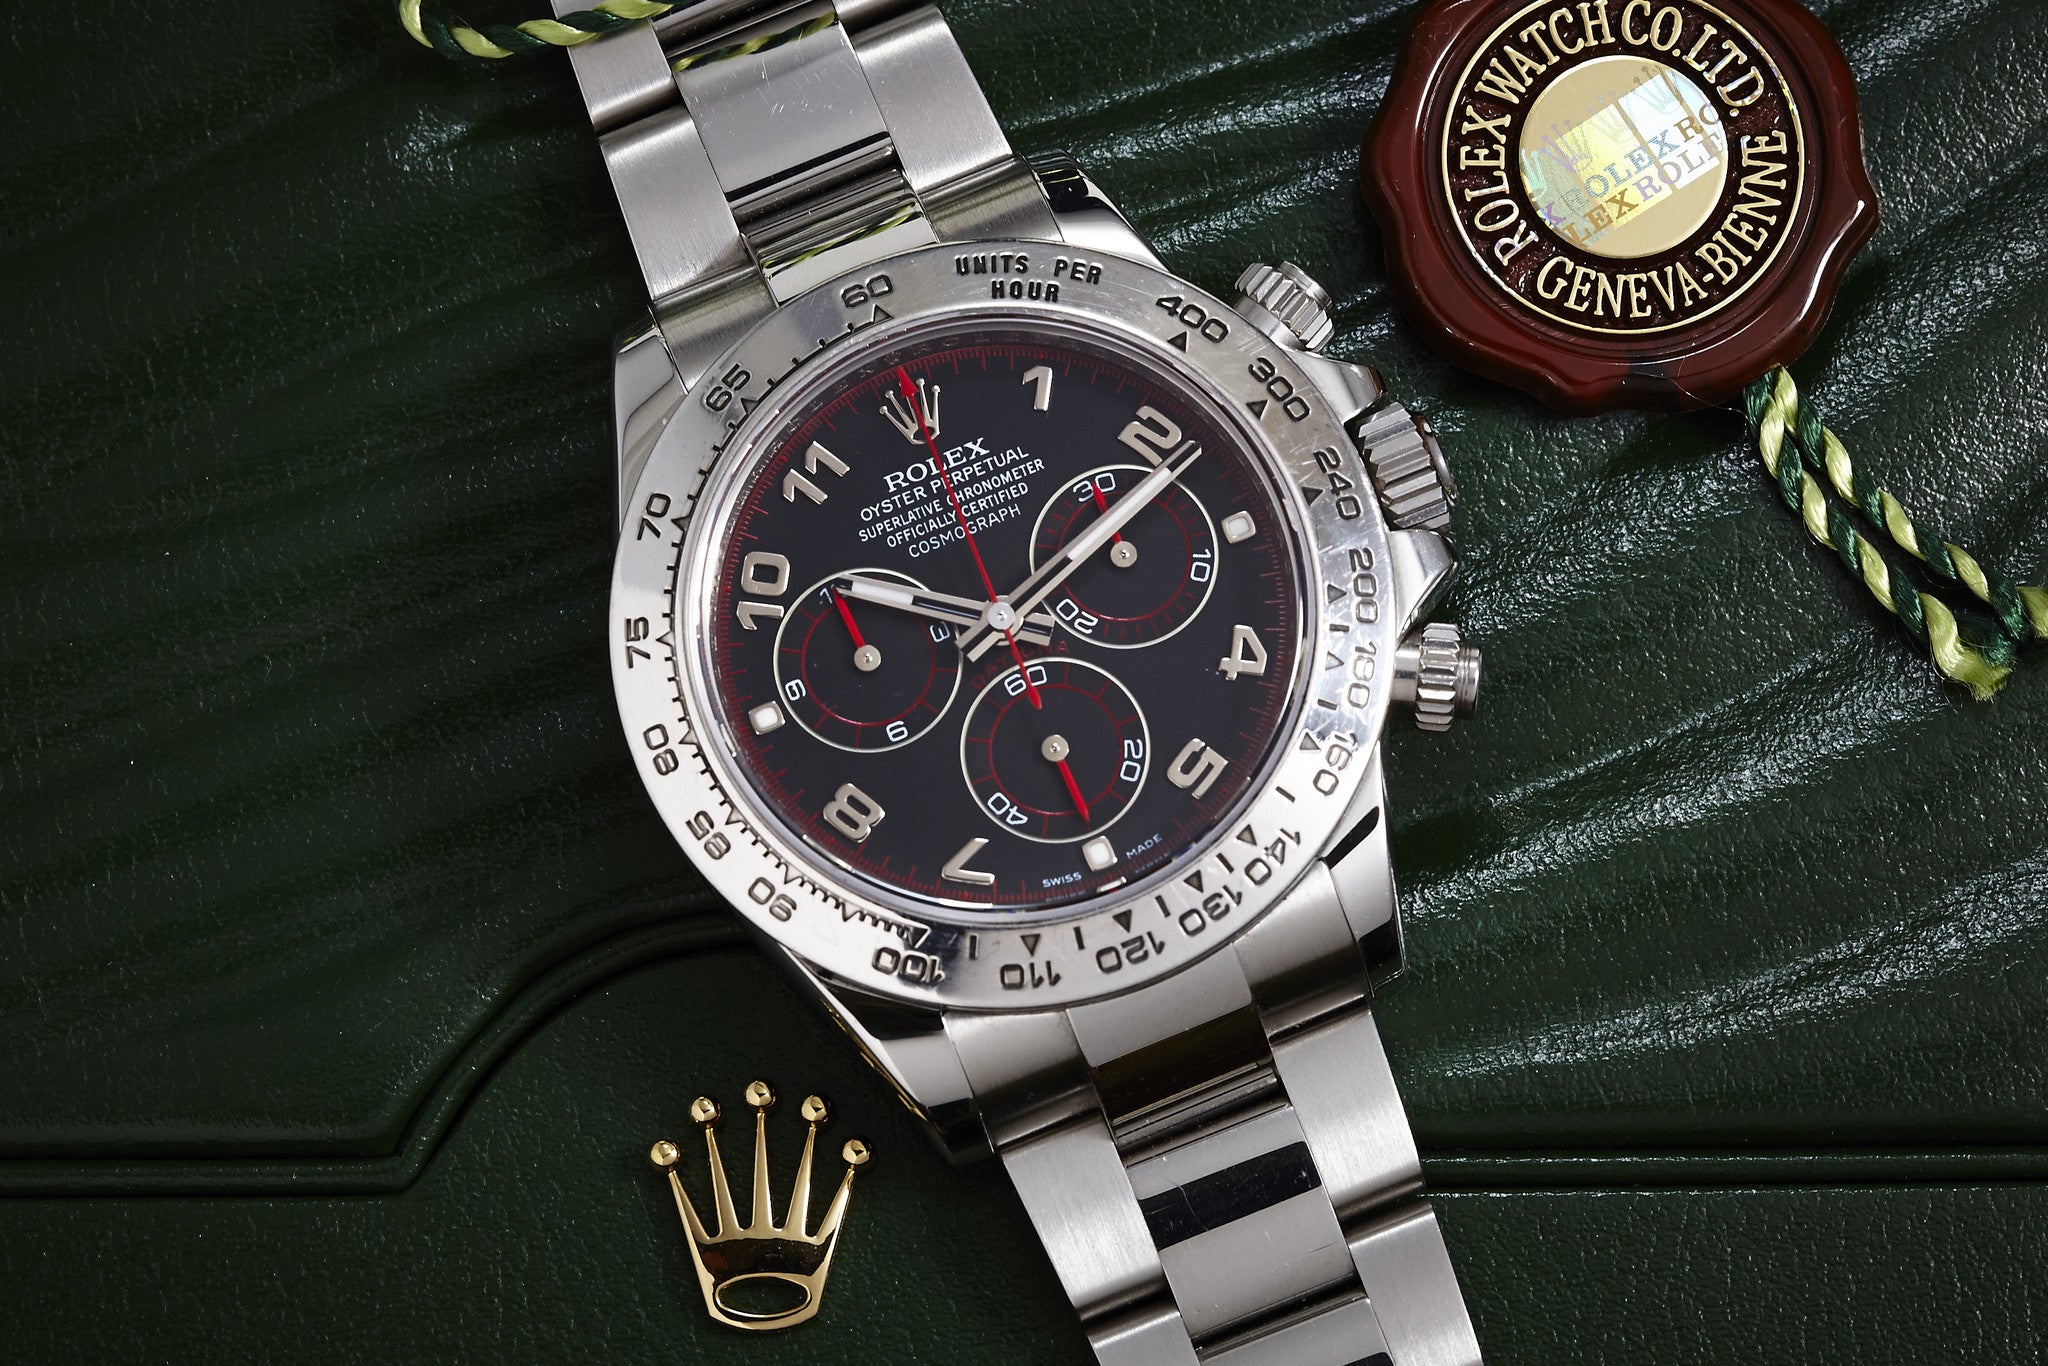 Rolex Daytona Steel with Arabic Racing Dial Box & Papers